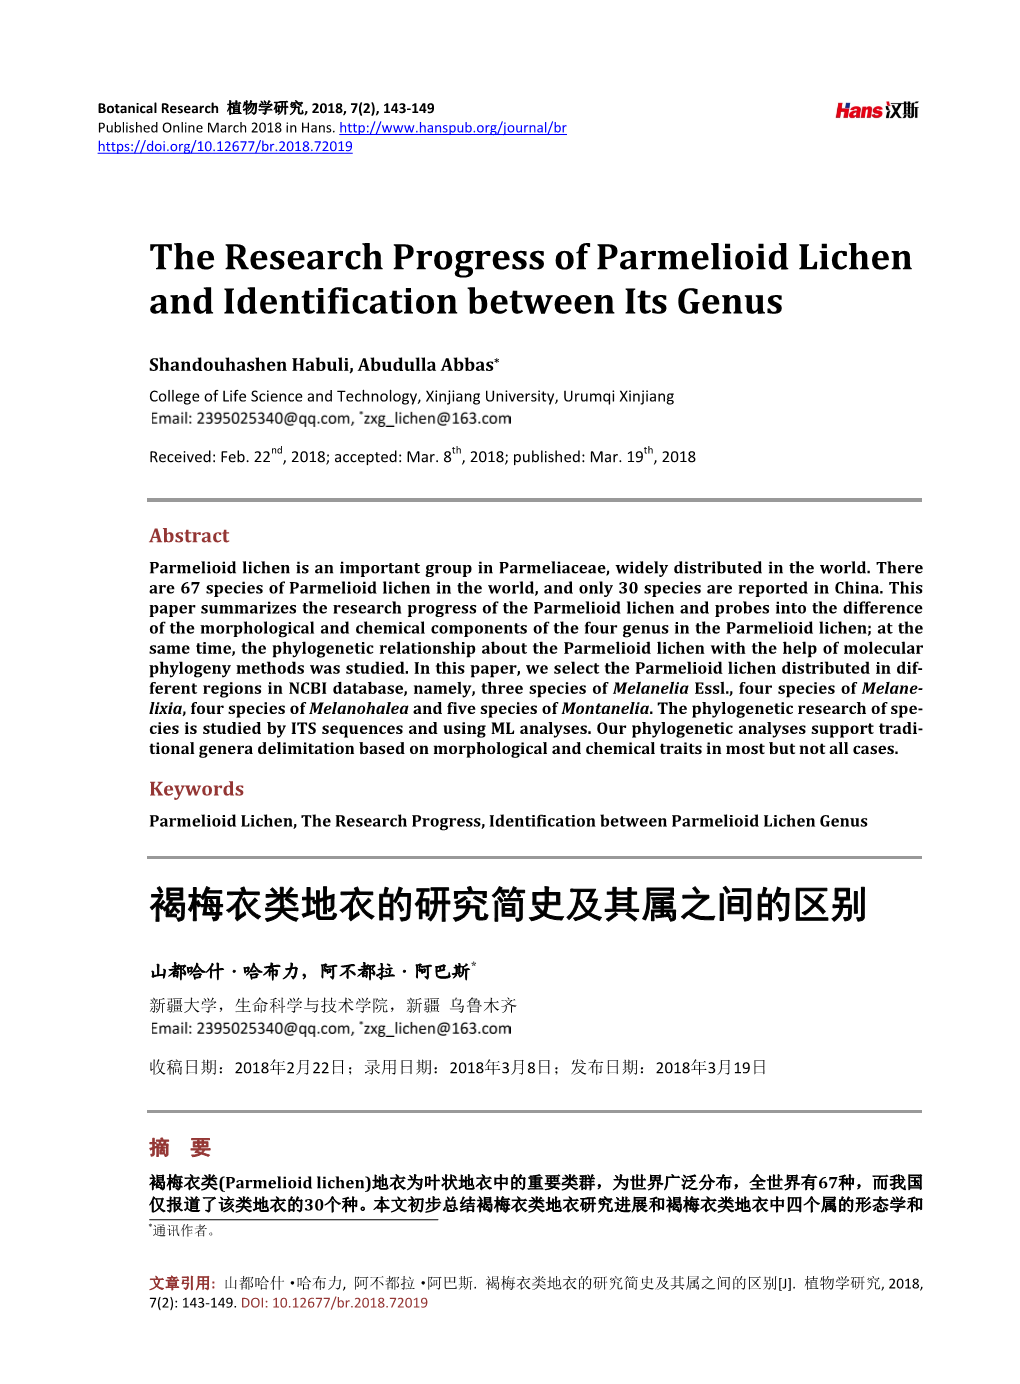 The Research Progress of Parmelioid Lichen and Identification Between Its Genus